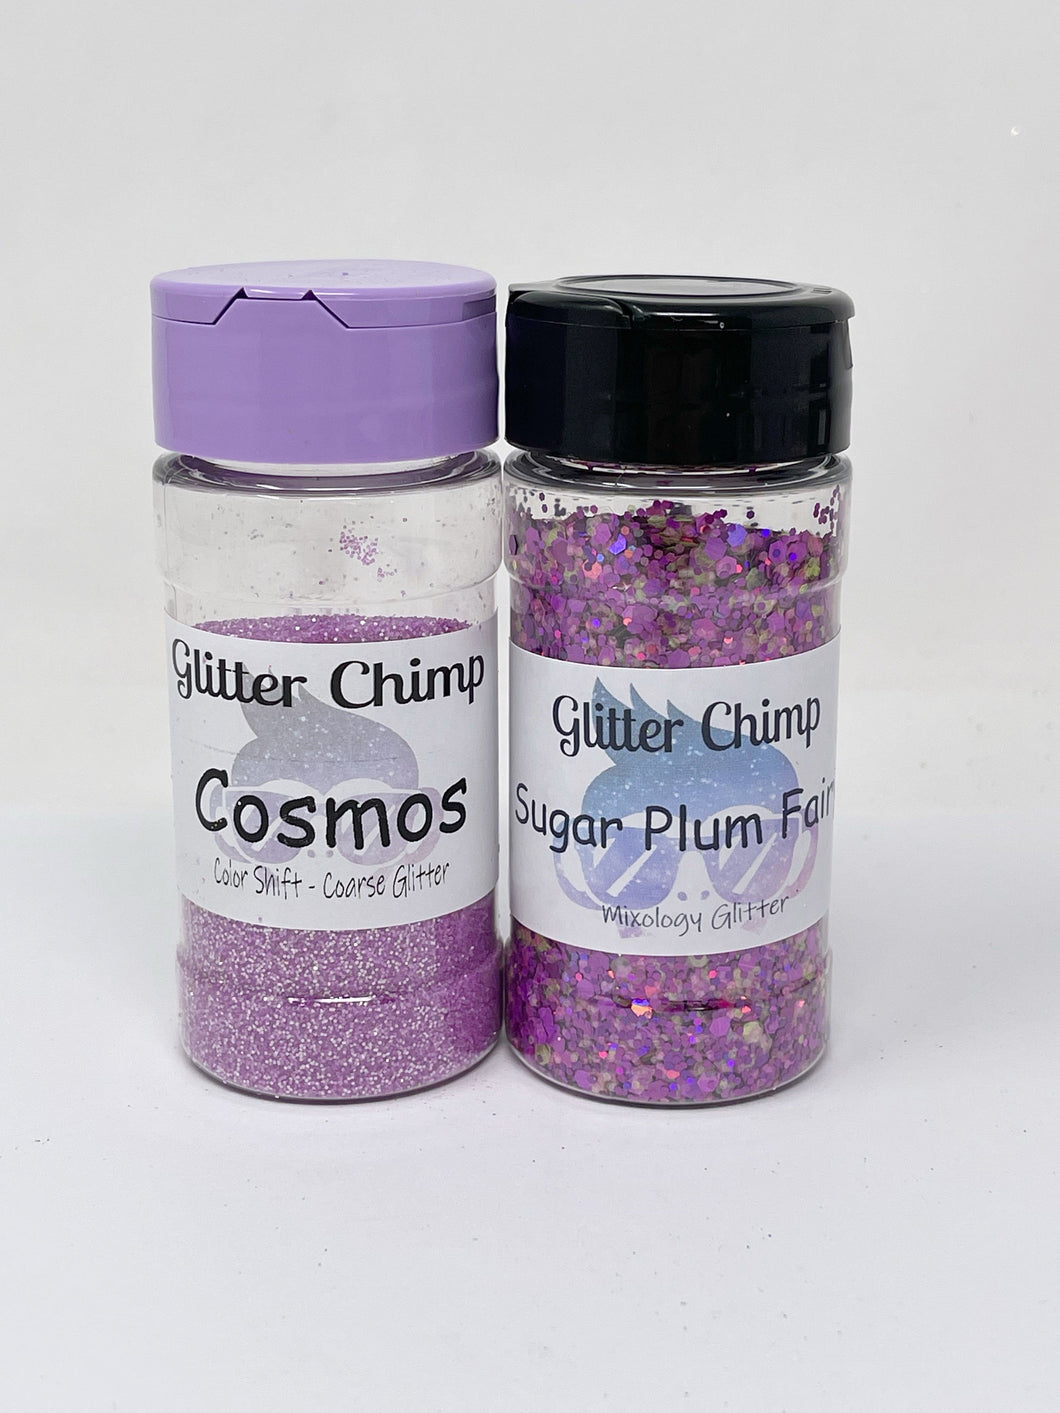 The Perfect Pairing - Cosmos Color Shift Coarse & Sugar Plum Fairy Mixology